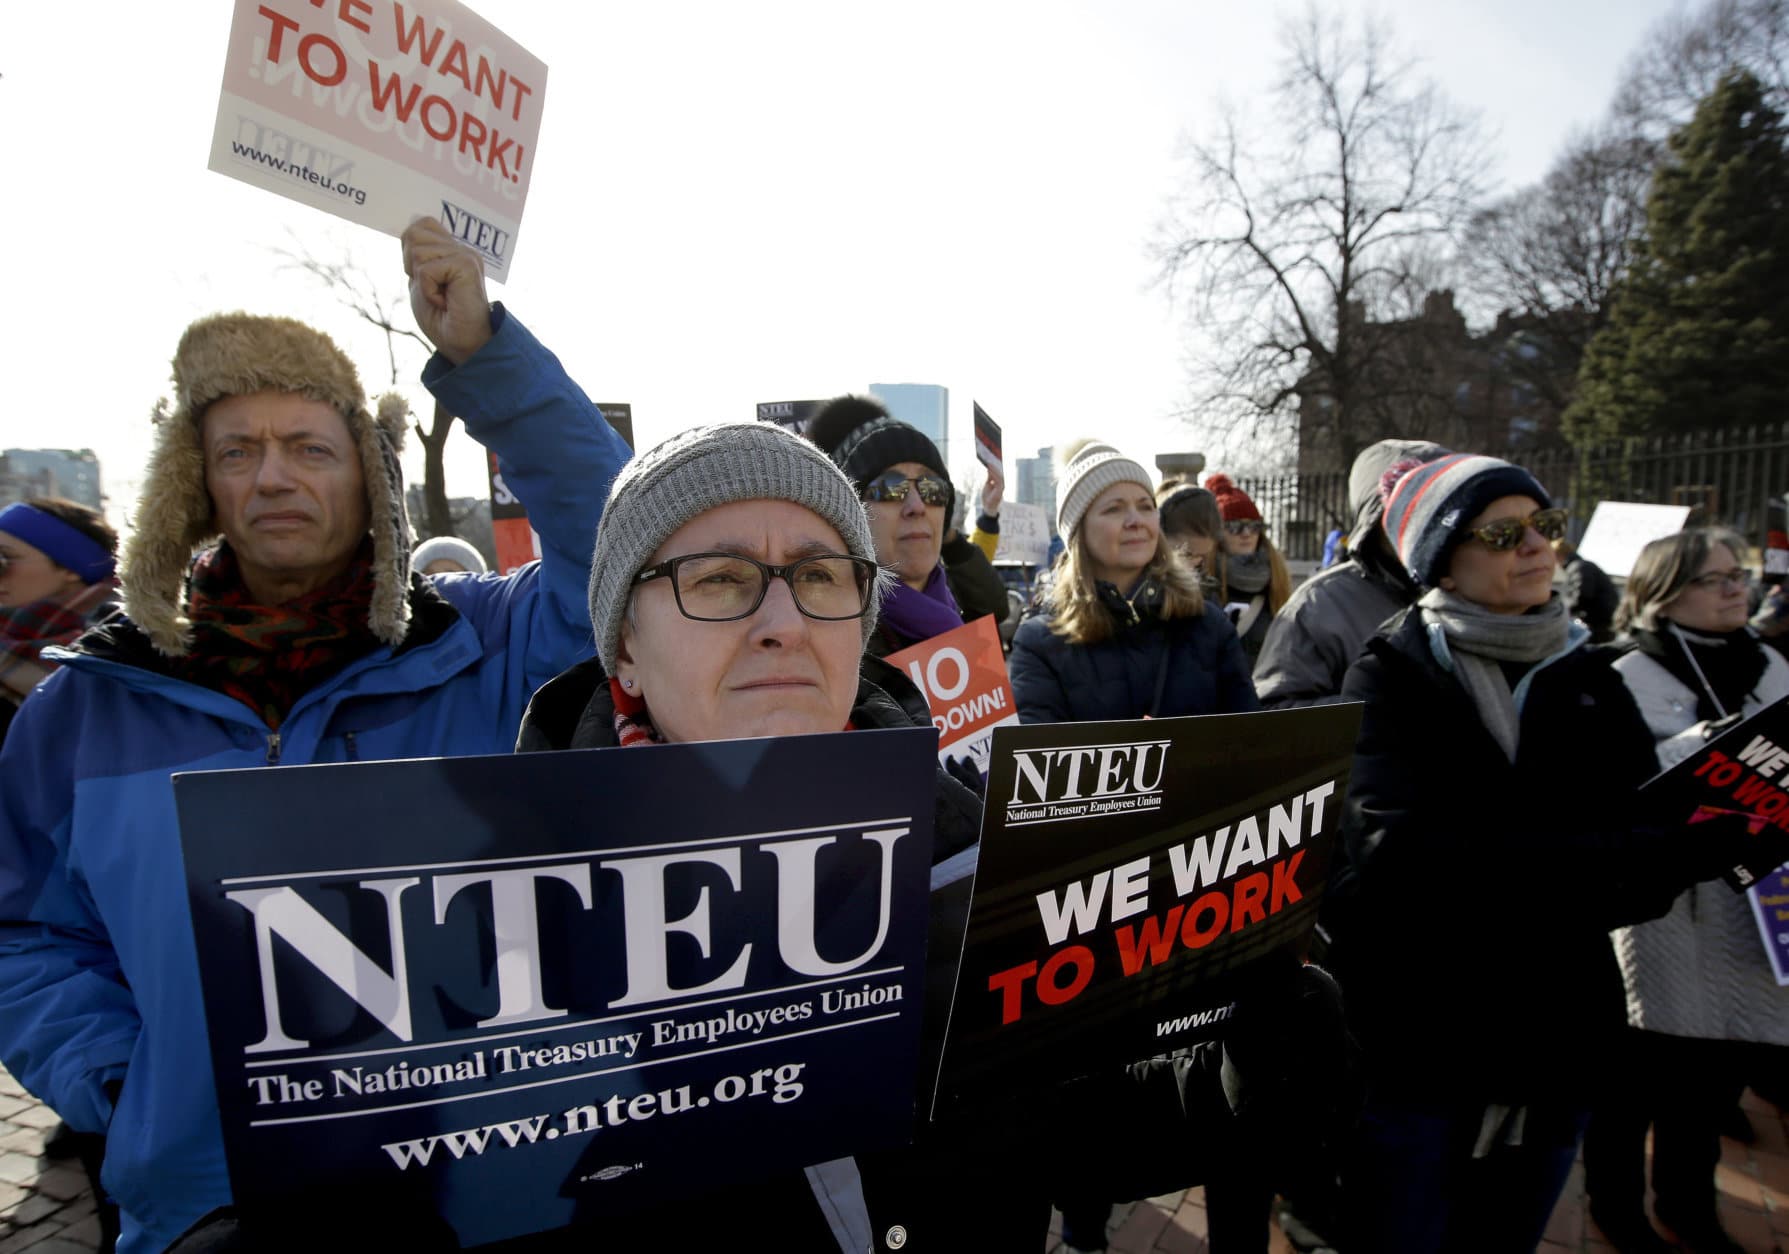 United States Department of Agriculture employee Lori Lodato, of Wilmington, Mass., display placards during a rally by federal employees and supporters, Thursday, Jan. 17, 2019, in front of the Statehouse in Boston, held to call for an end of the partial shutdown of the federal government. (AP Photo/Steven Senne)